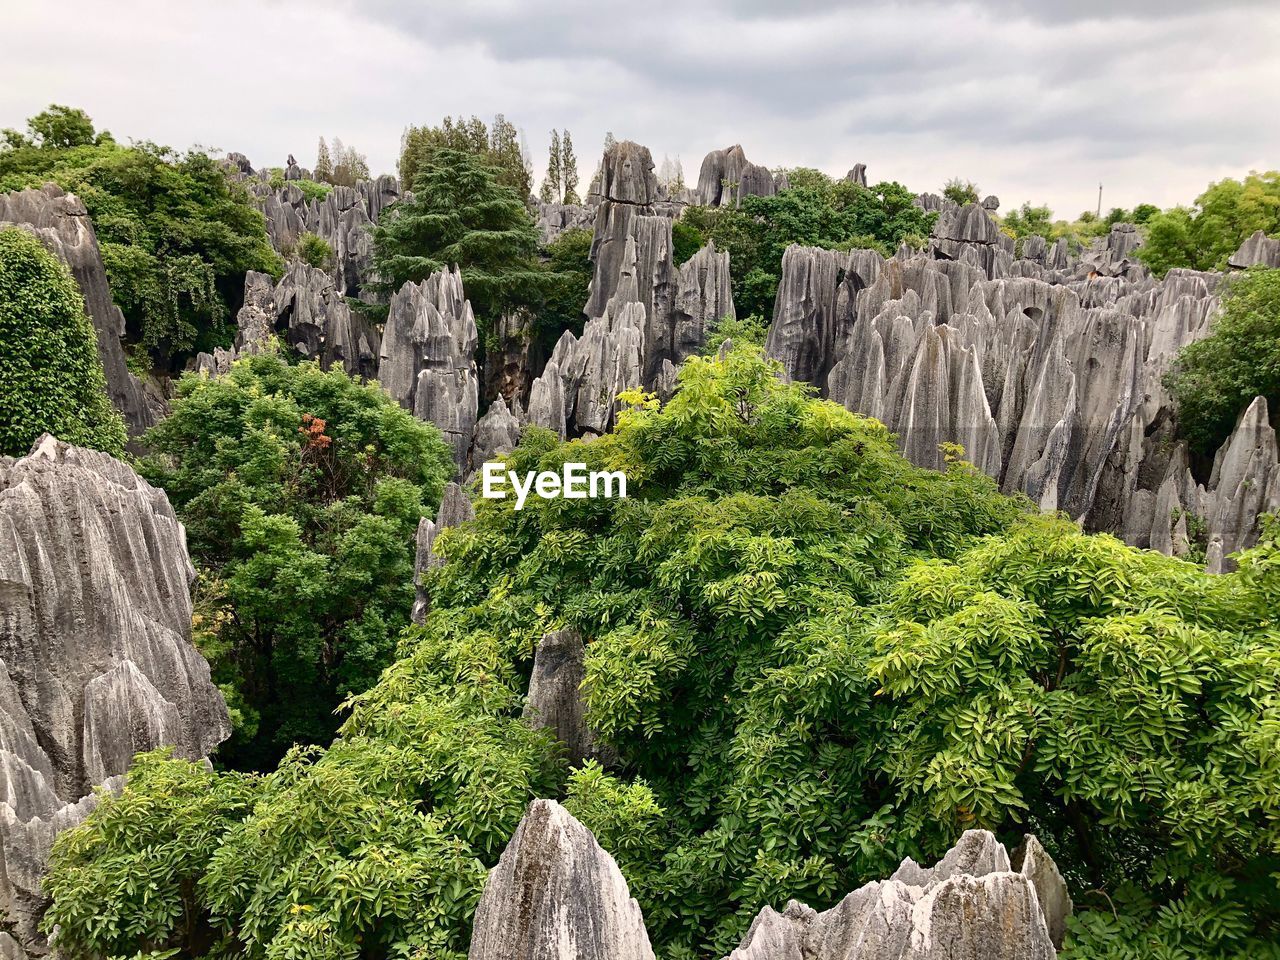 PANORAMIC VIEW OF ROCKS AND TREES